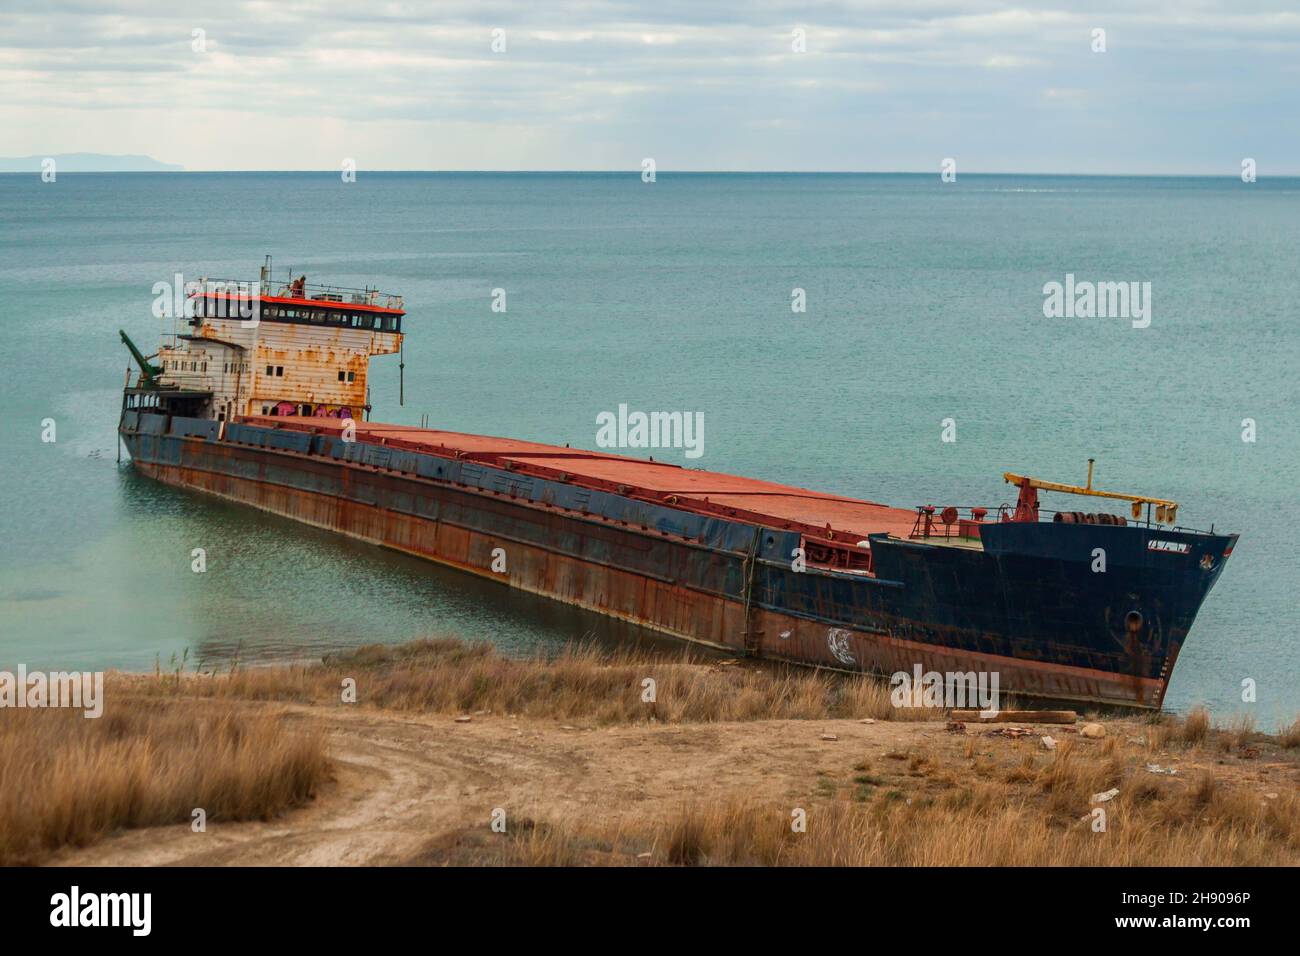 Surov-a big old ship wrecked on the Russian coast and abandoned on the beach. Traces of oil products can be seen on the surface of the water Stock Photo